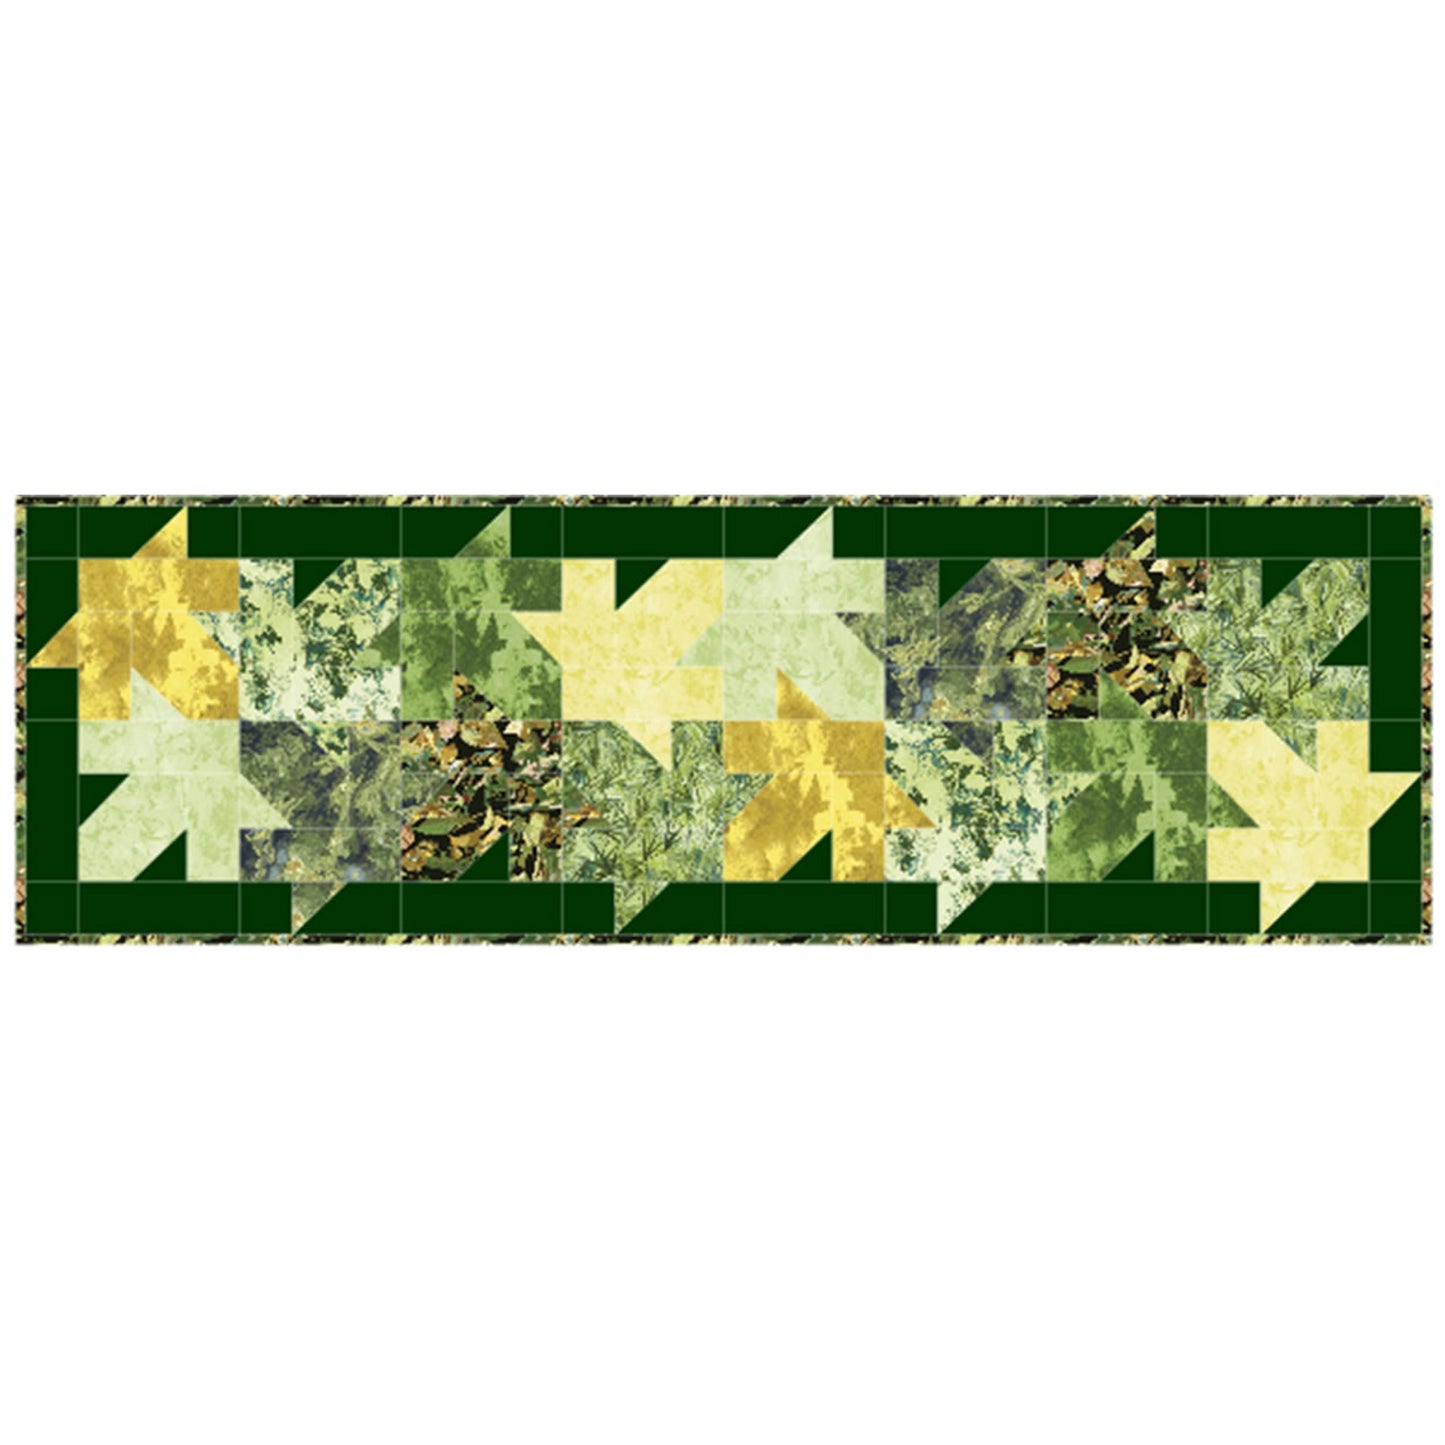 Beautiful bed or table runner covered in green and yellow leaves with a dark green border.